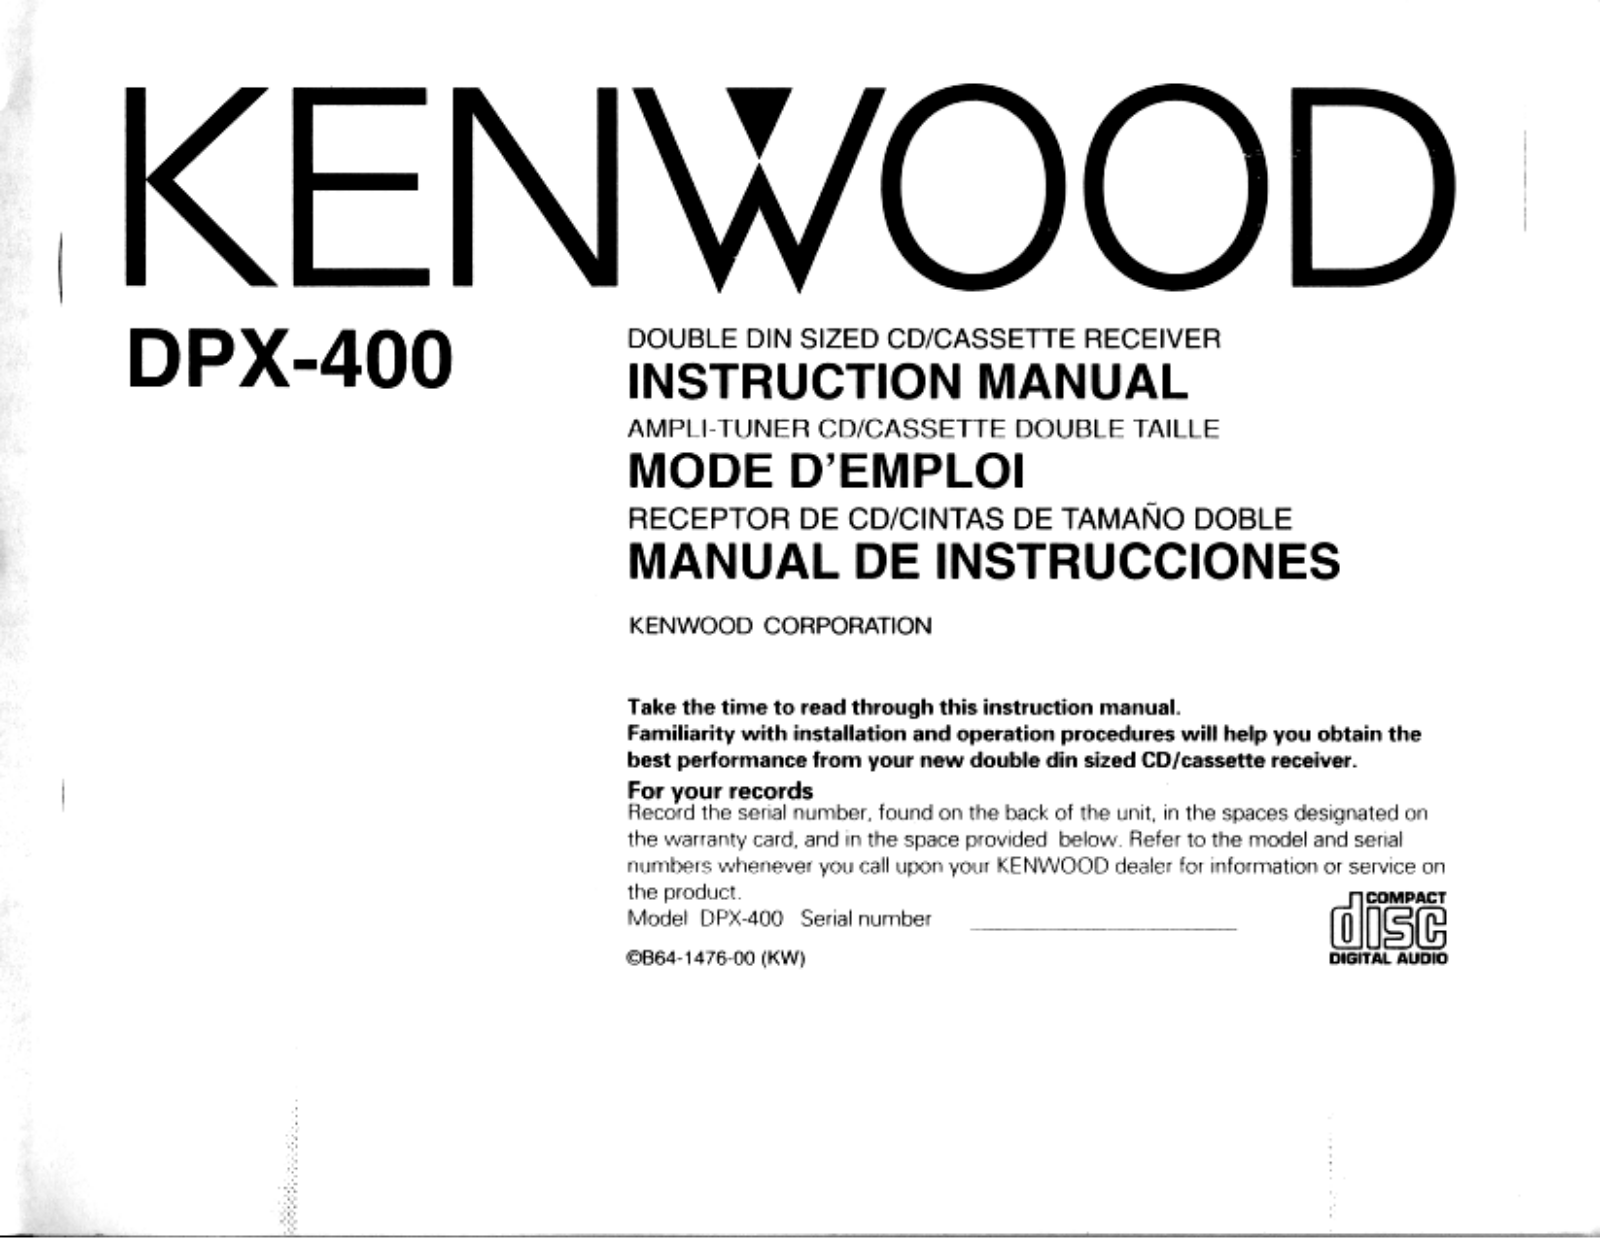 Kenwood DPX-400 Owner's Manual